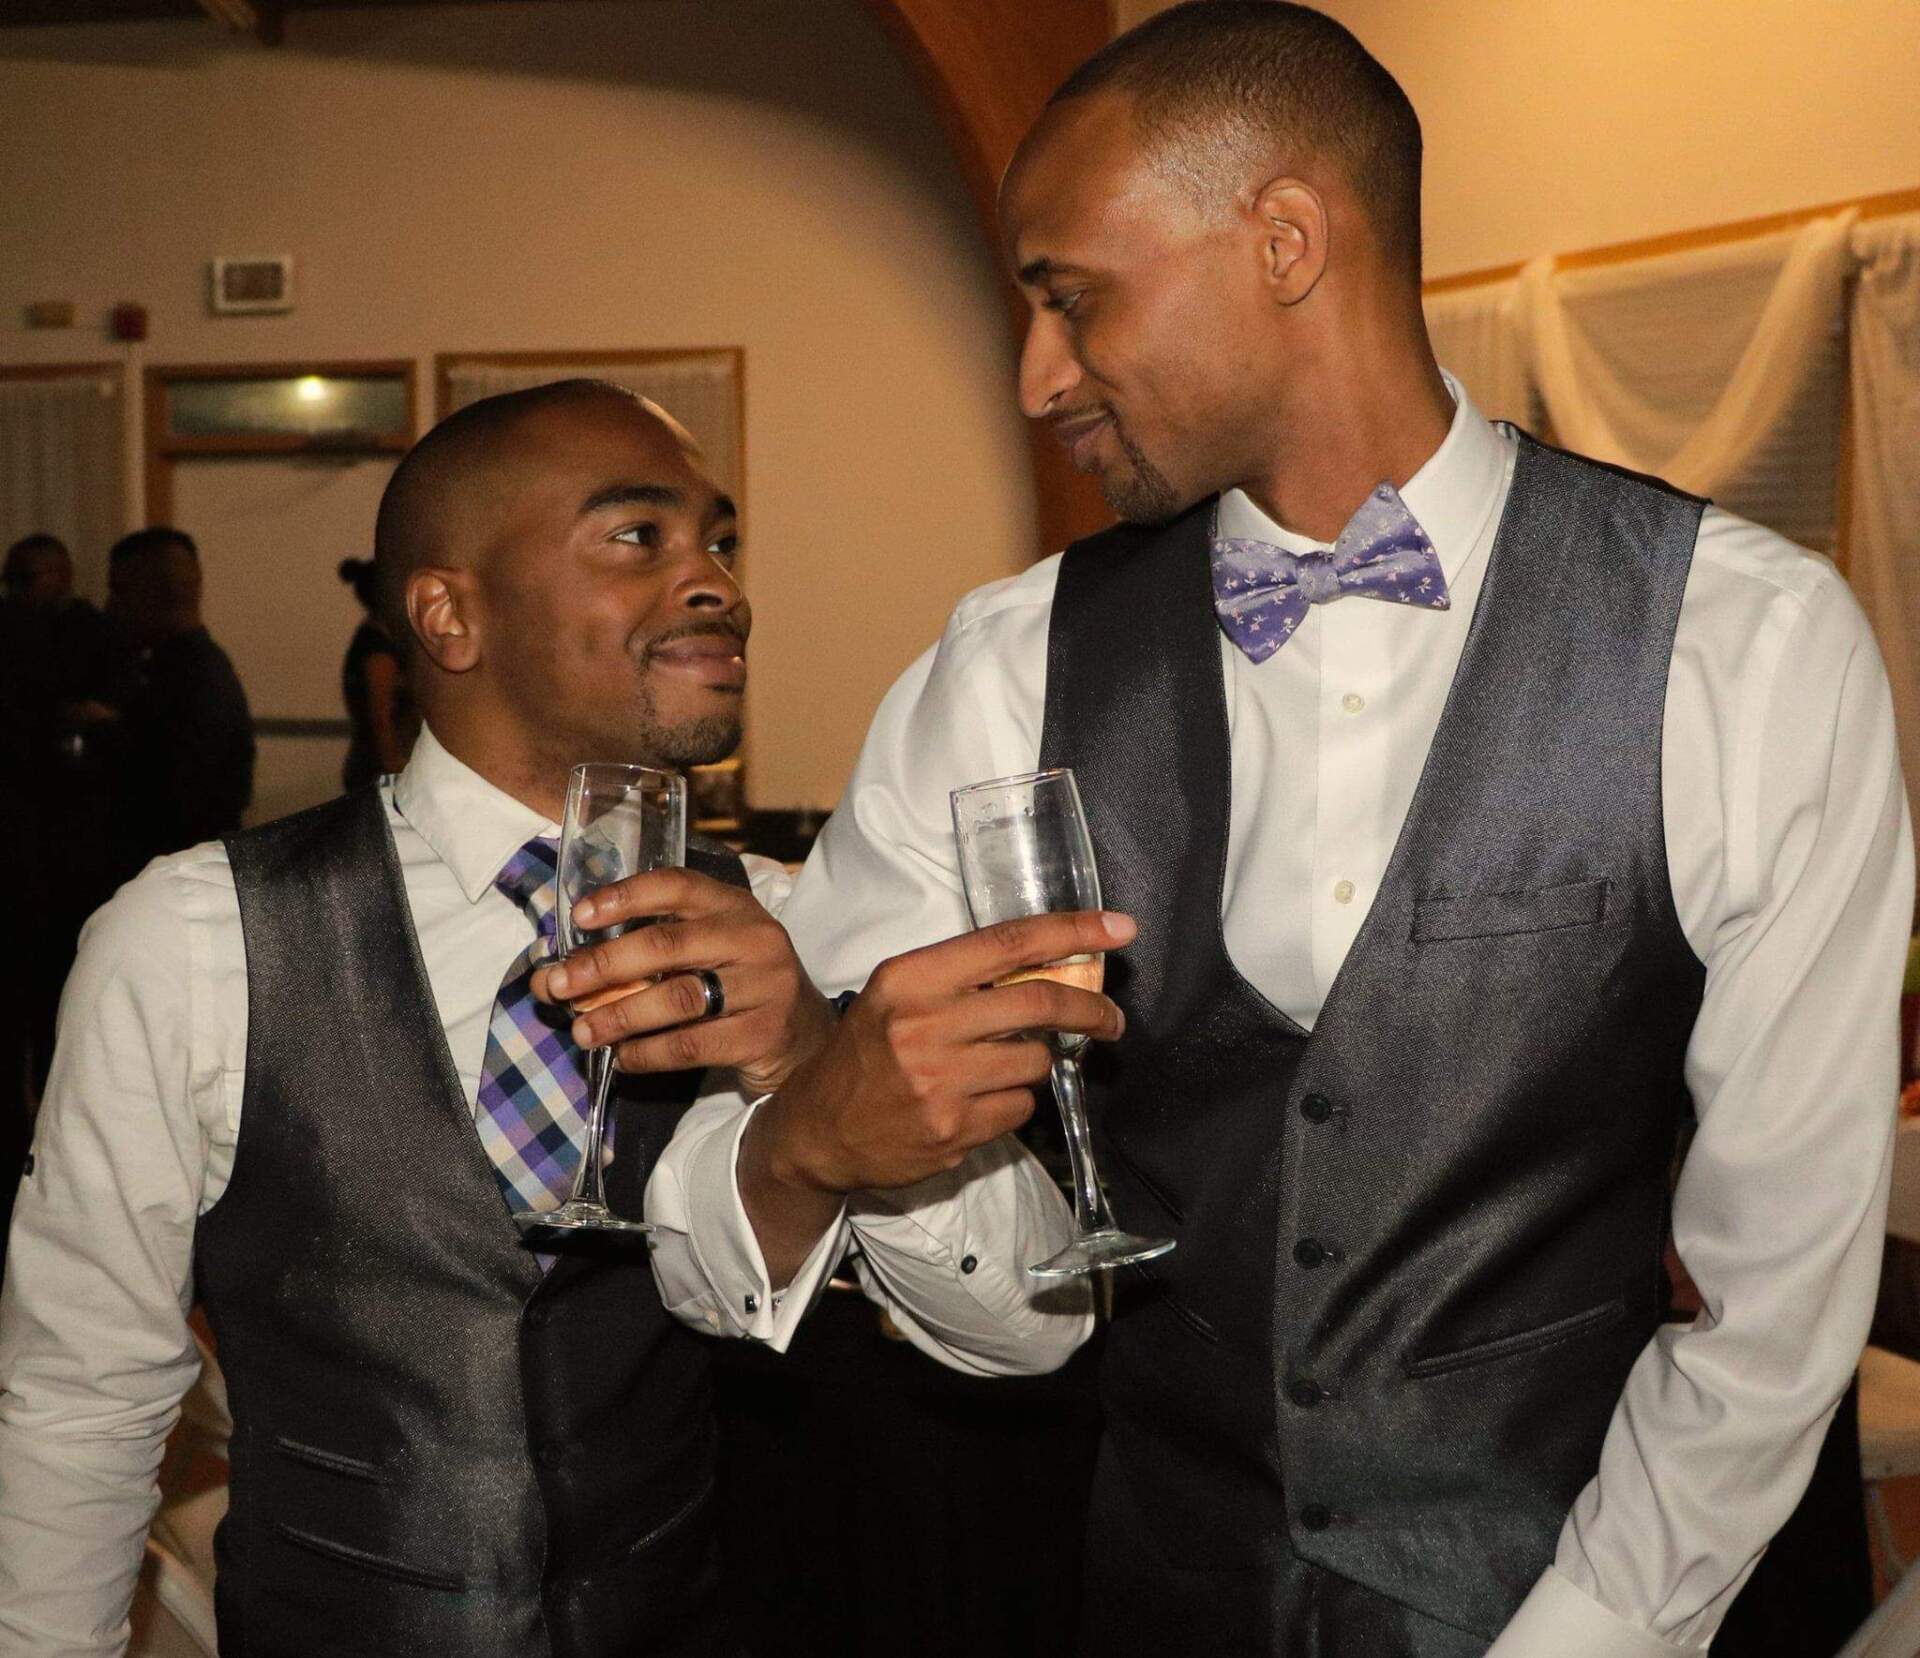 Quincey J. Roberts and Corey Yarbrough on their wedding day. (Courtesy)